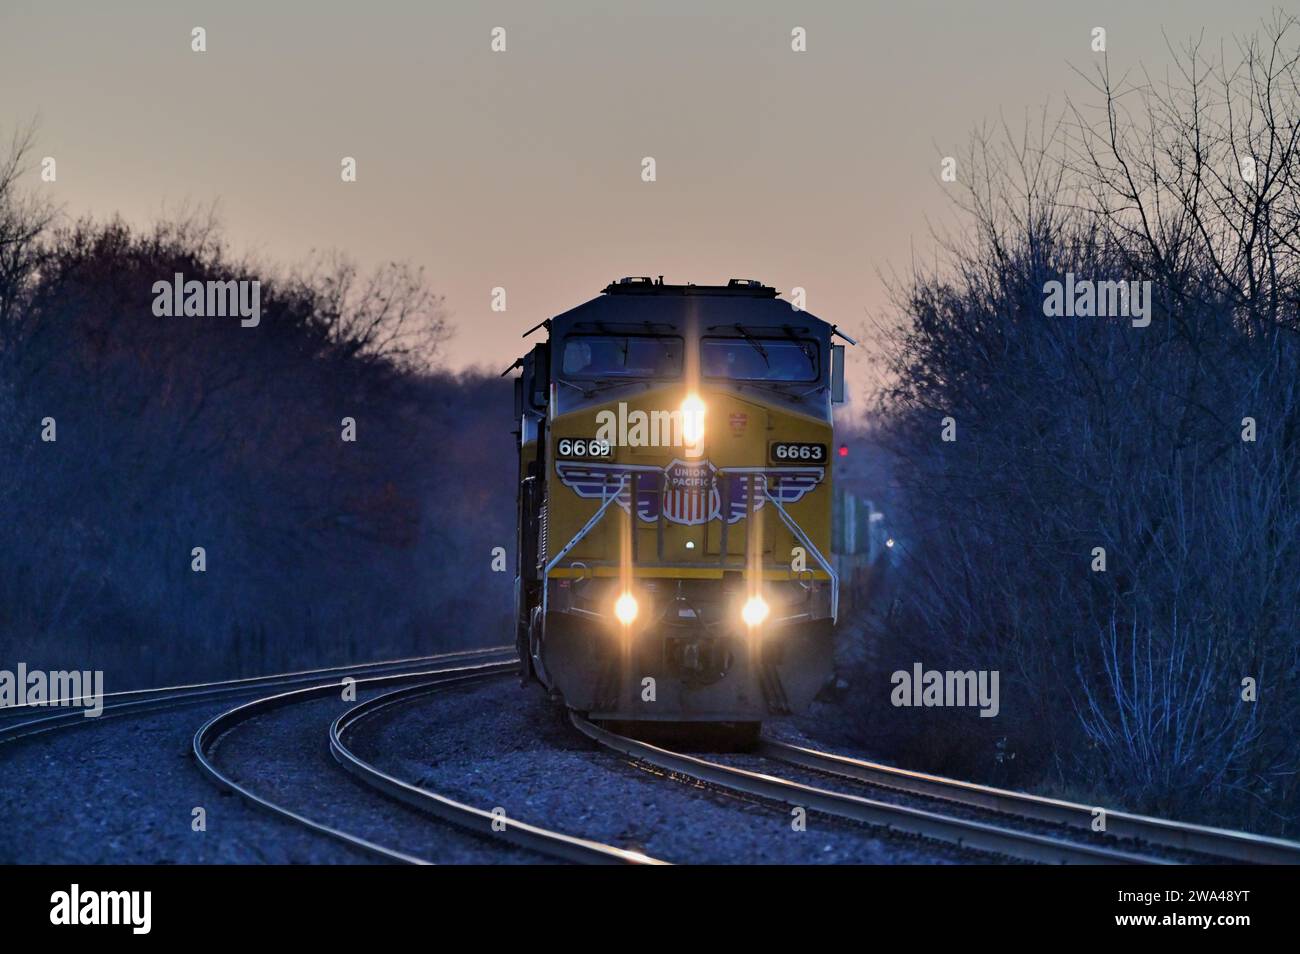 Winfield, Illinois, USA. A locomotive leads a Union Pacific intermodal freight train into a curve at dusk. Stock Photo